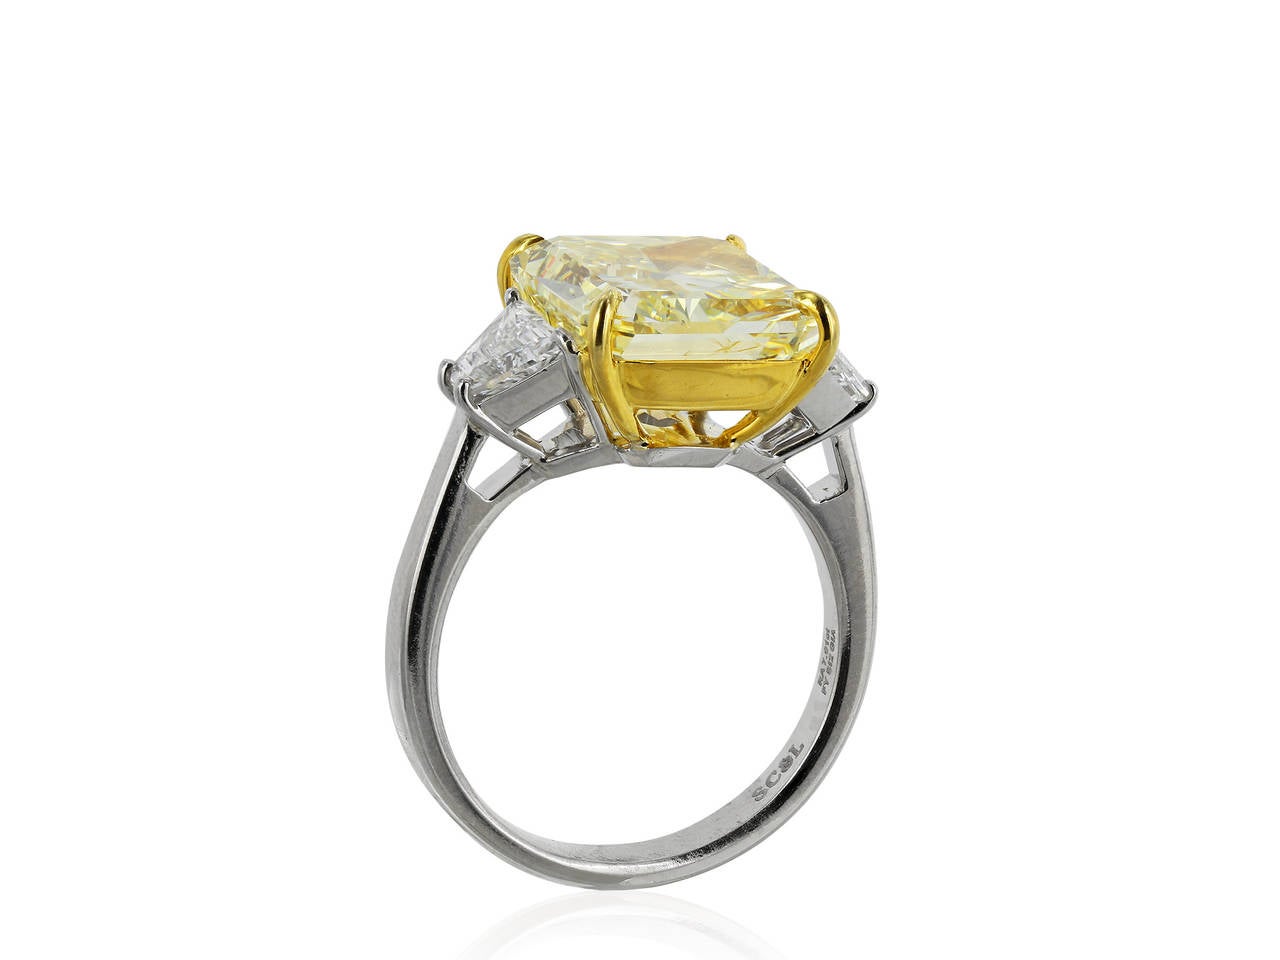 Contemporary 7.01 Carat Fancy Yellow GIA and White Diamond Ring For Sale